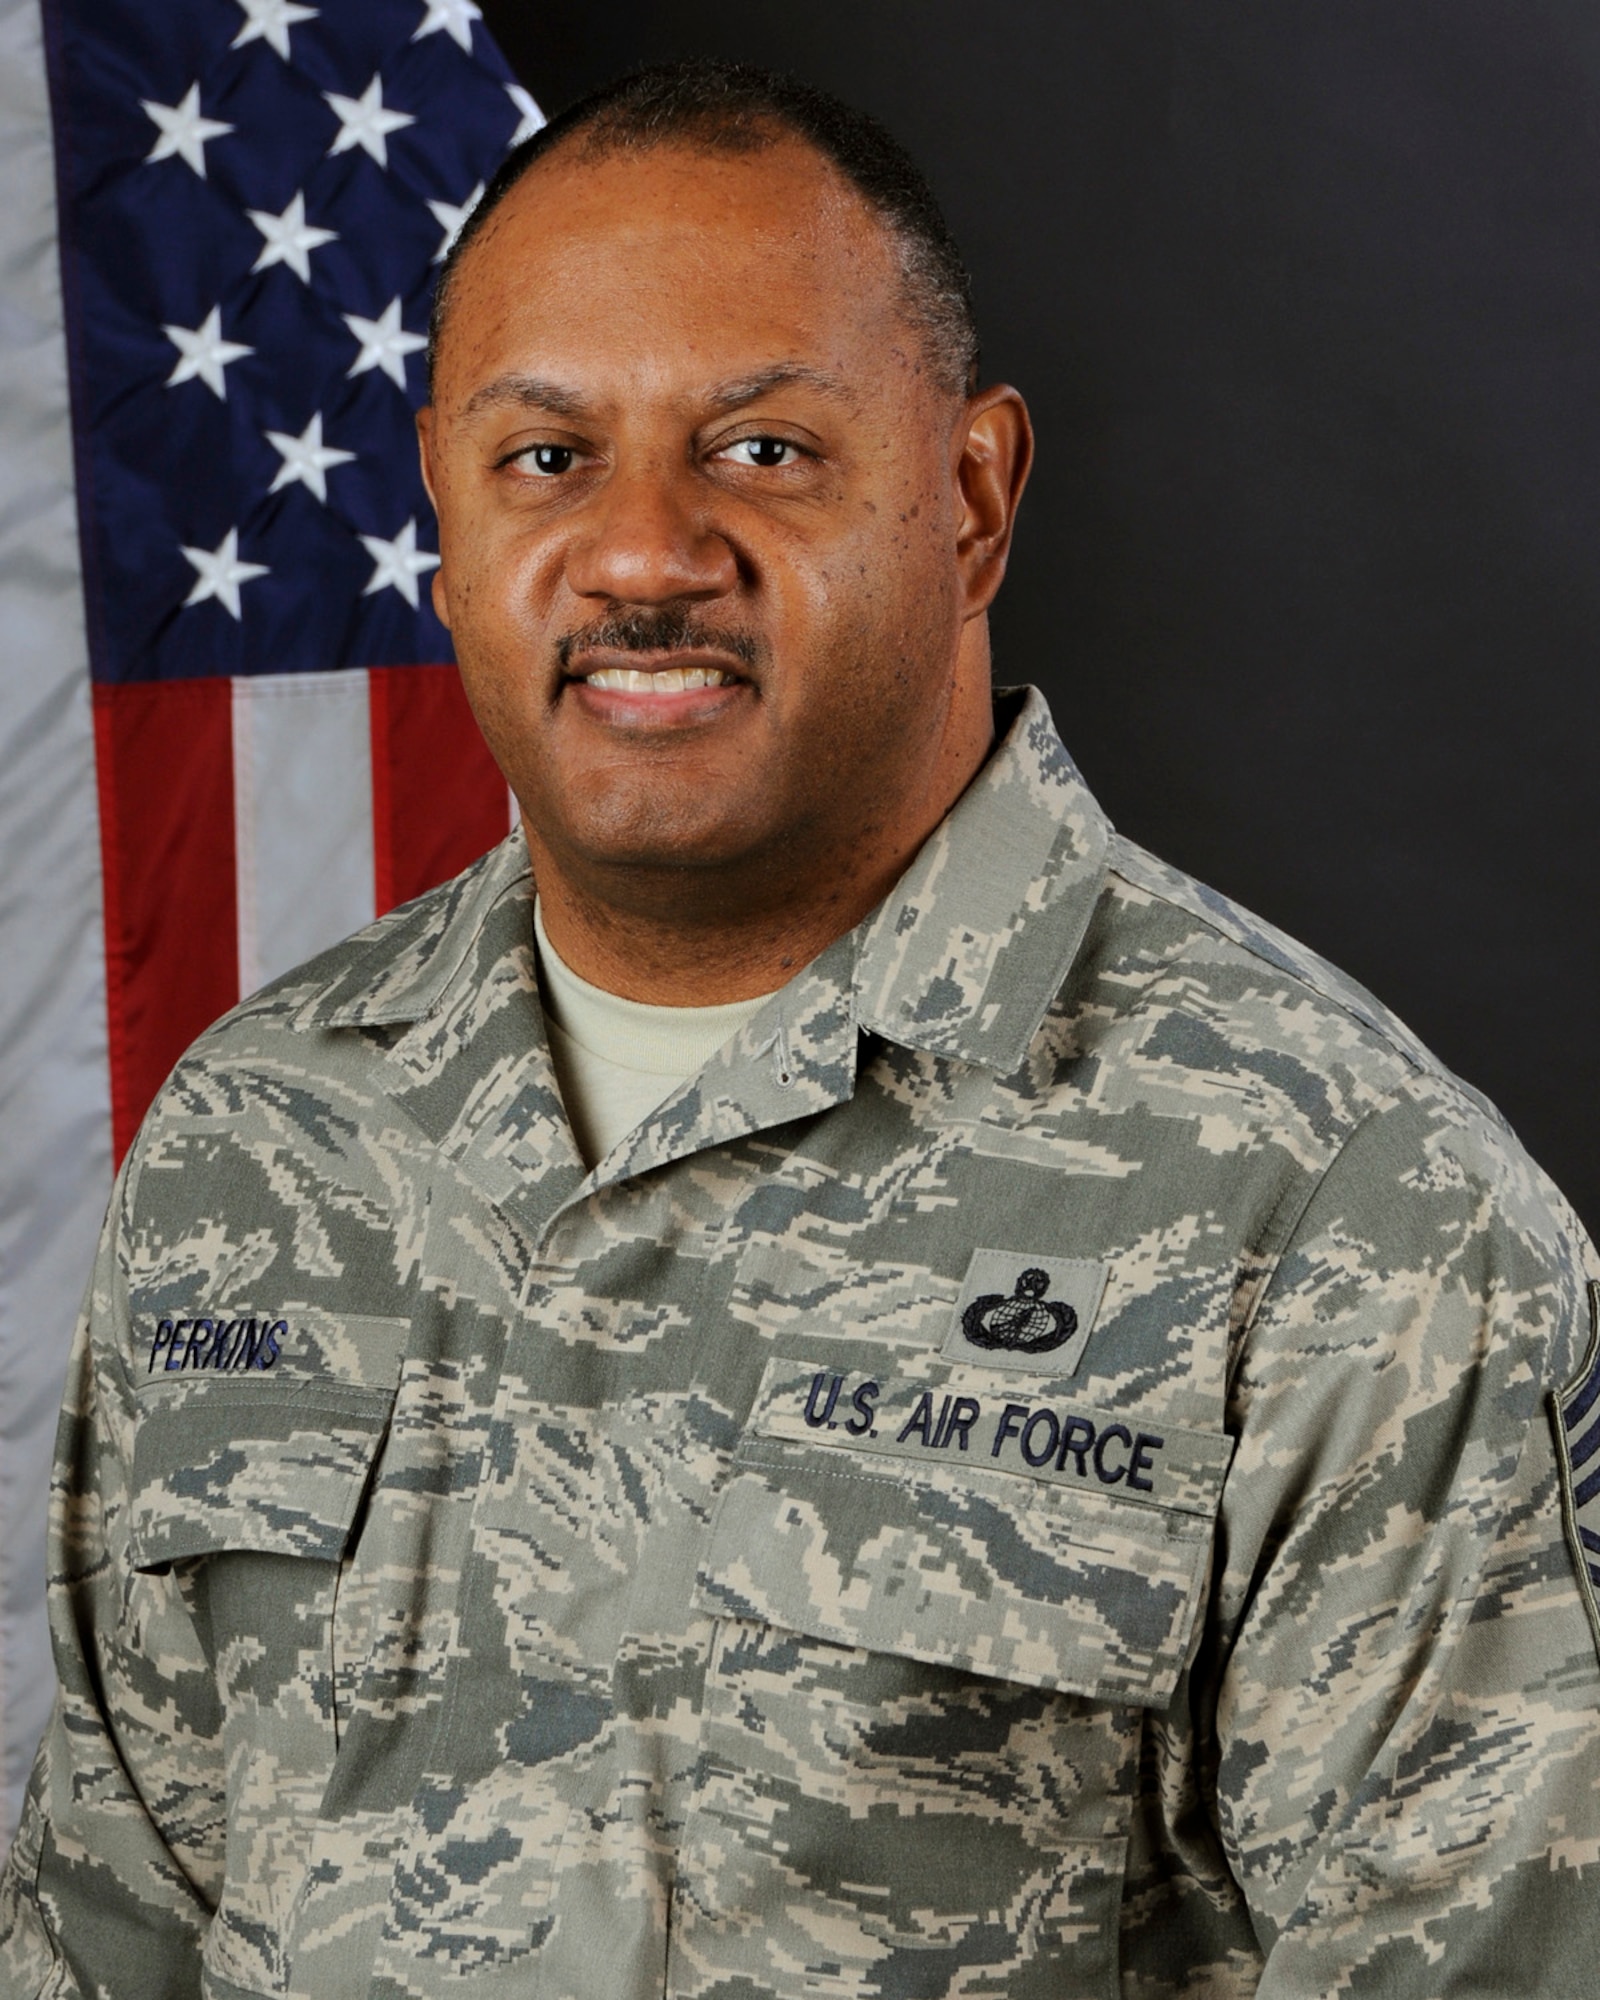 Chief Master Sgt. Everett Perkins, with the 169th Fighter Wing at McEntire Joint National Guard Base, S.C., March 3, 2013.
(National Guard photo by Tech. Sgt. Caycee Watson/Released)
